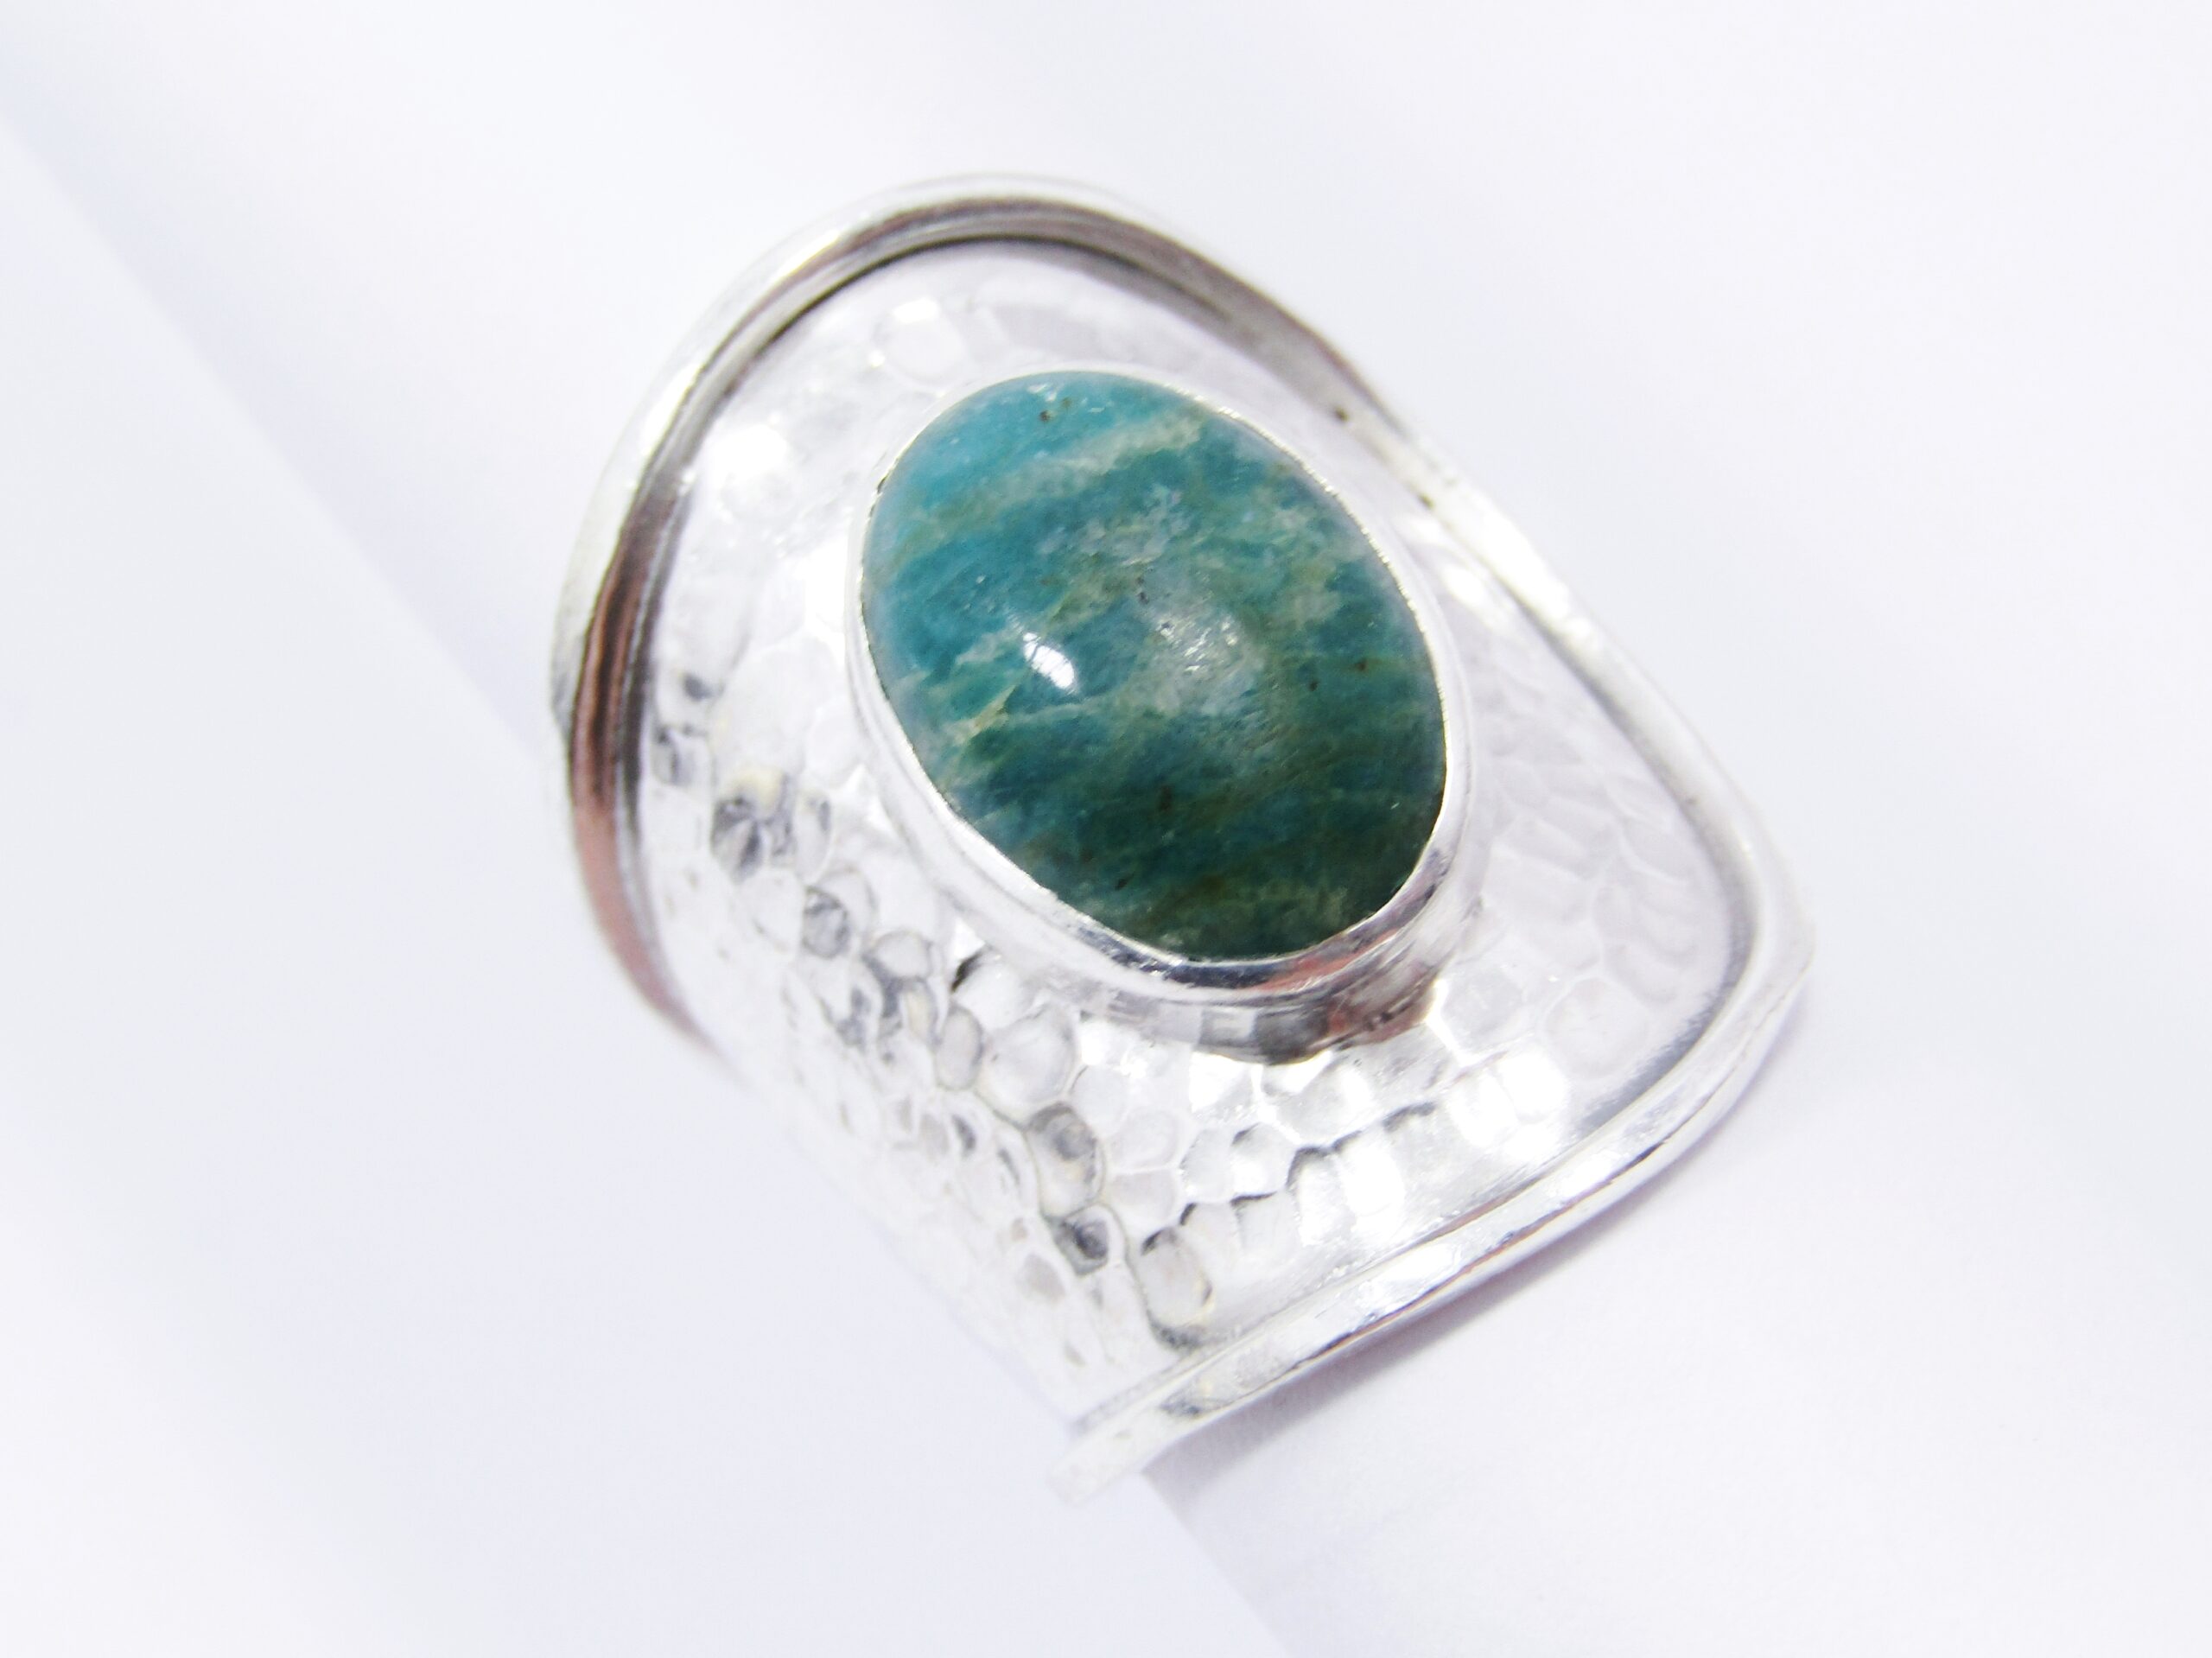 A Lovely Broad Open ended Green Stone Ring in Sterling Silver.